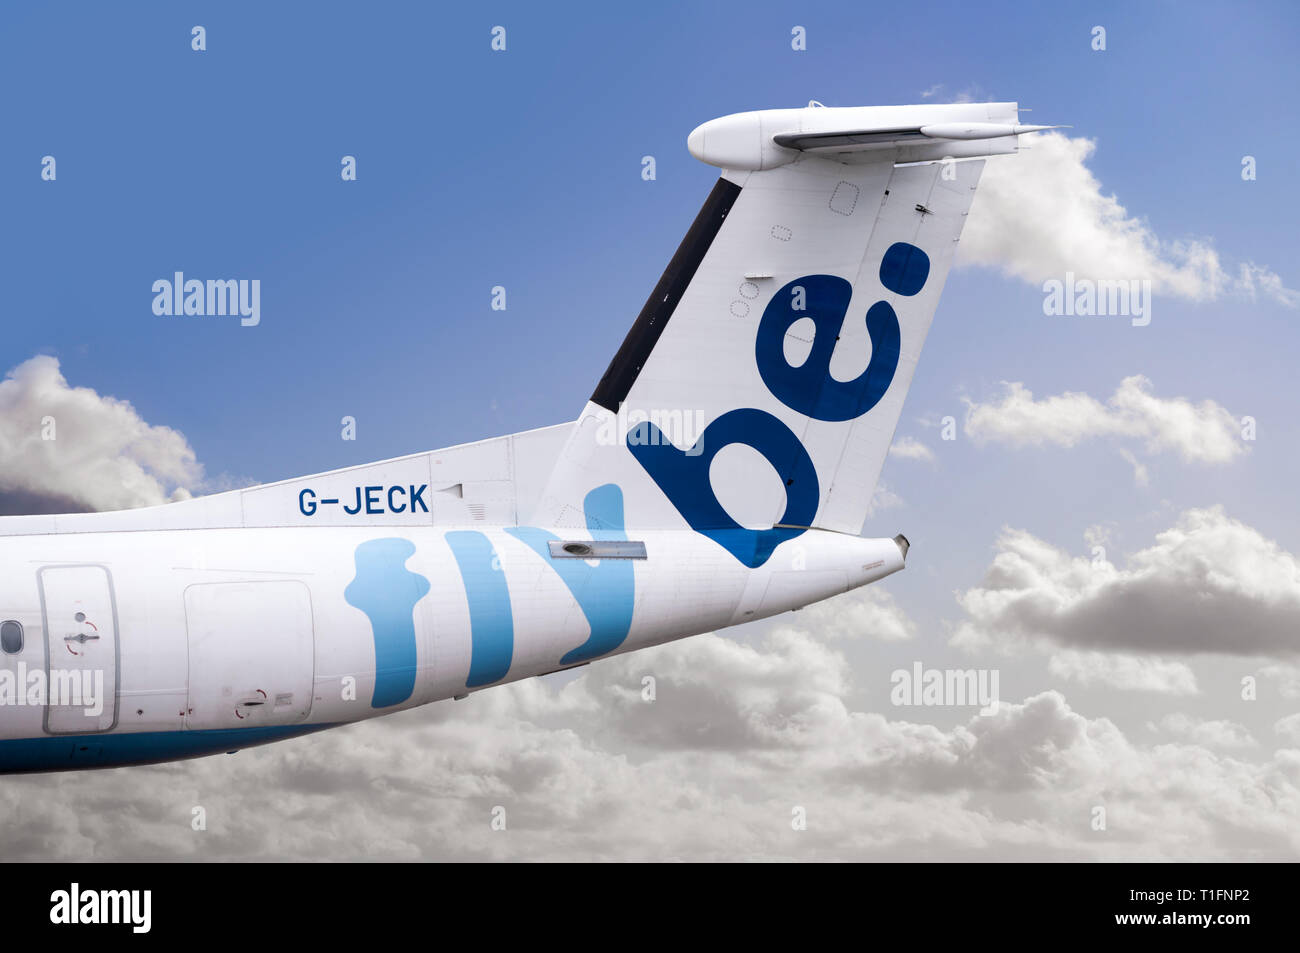 Manchester Airport, United Kingdom - April 30, 2016: Flybe G-JECK De Havilland Canada DHC-8-402Q Dash 8 - cn 4113 moments after arrival. Stock Photo